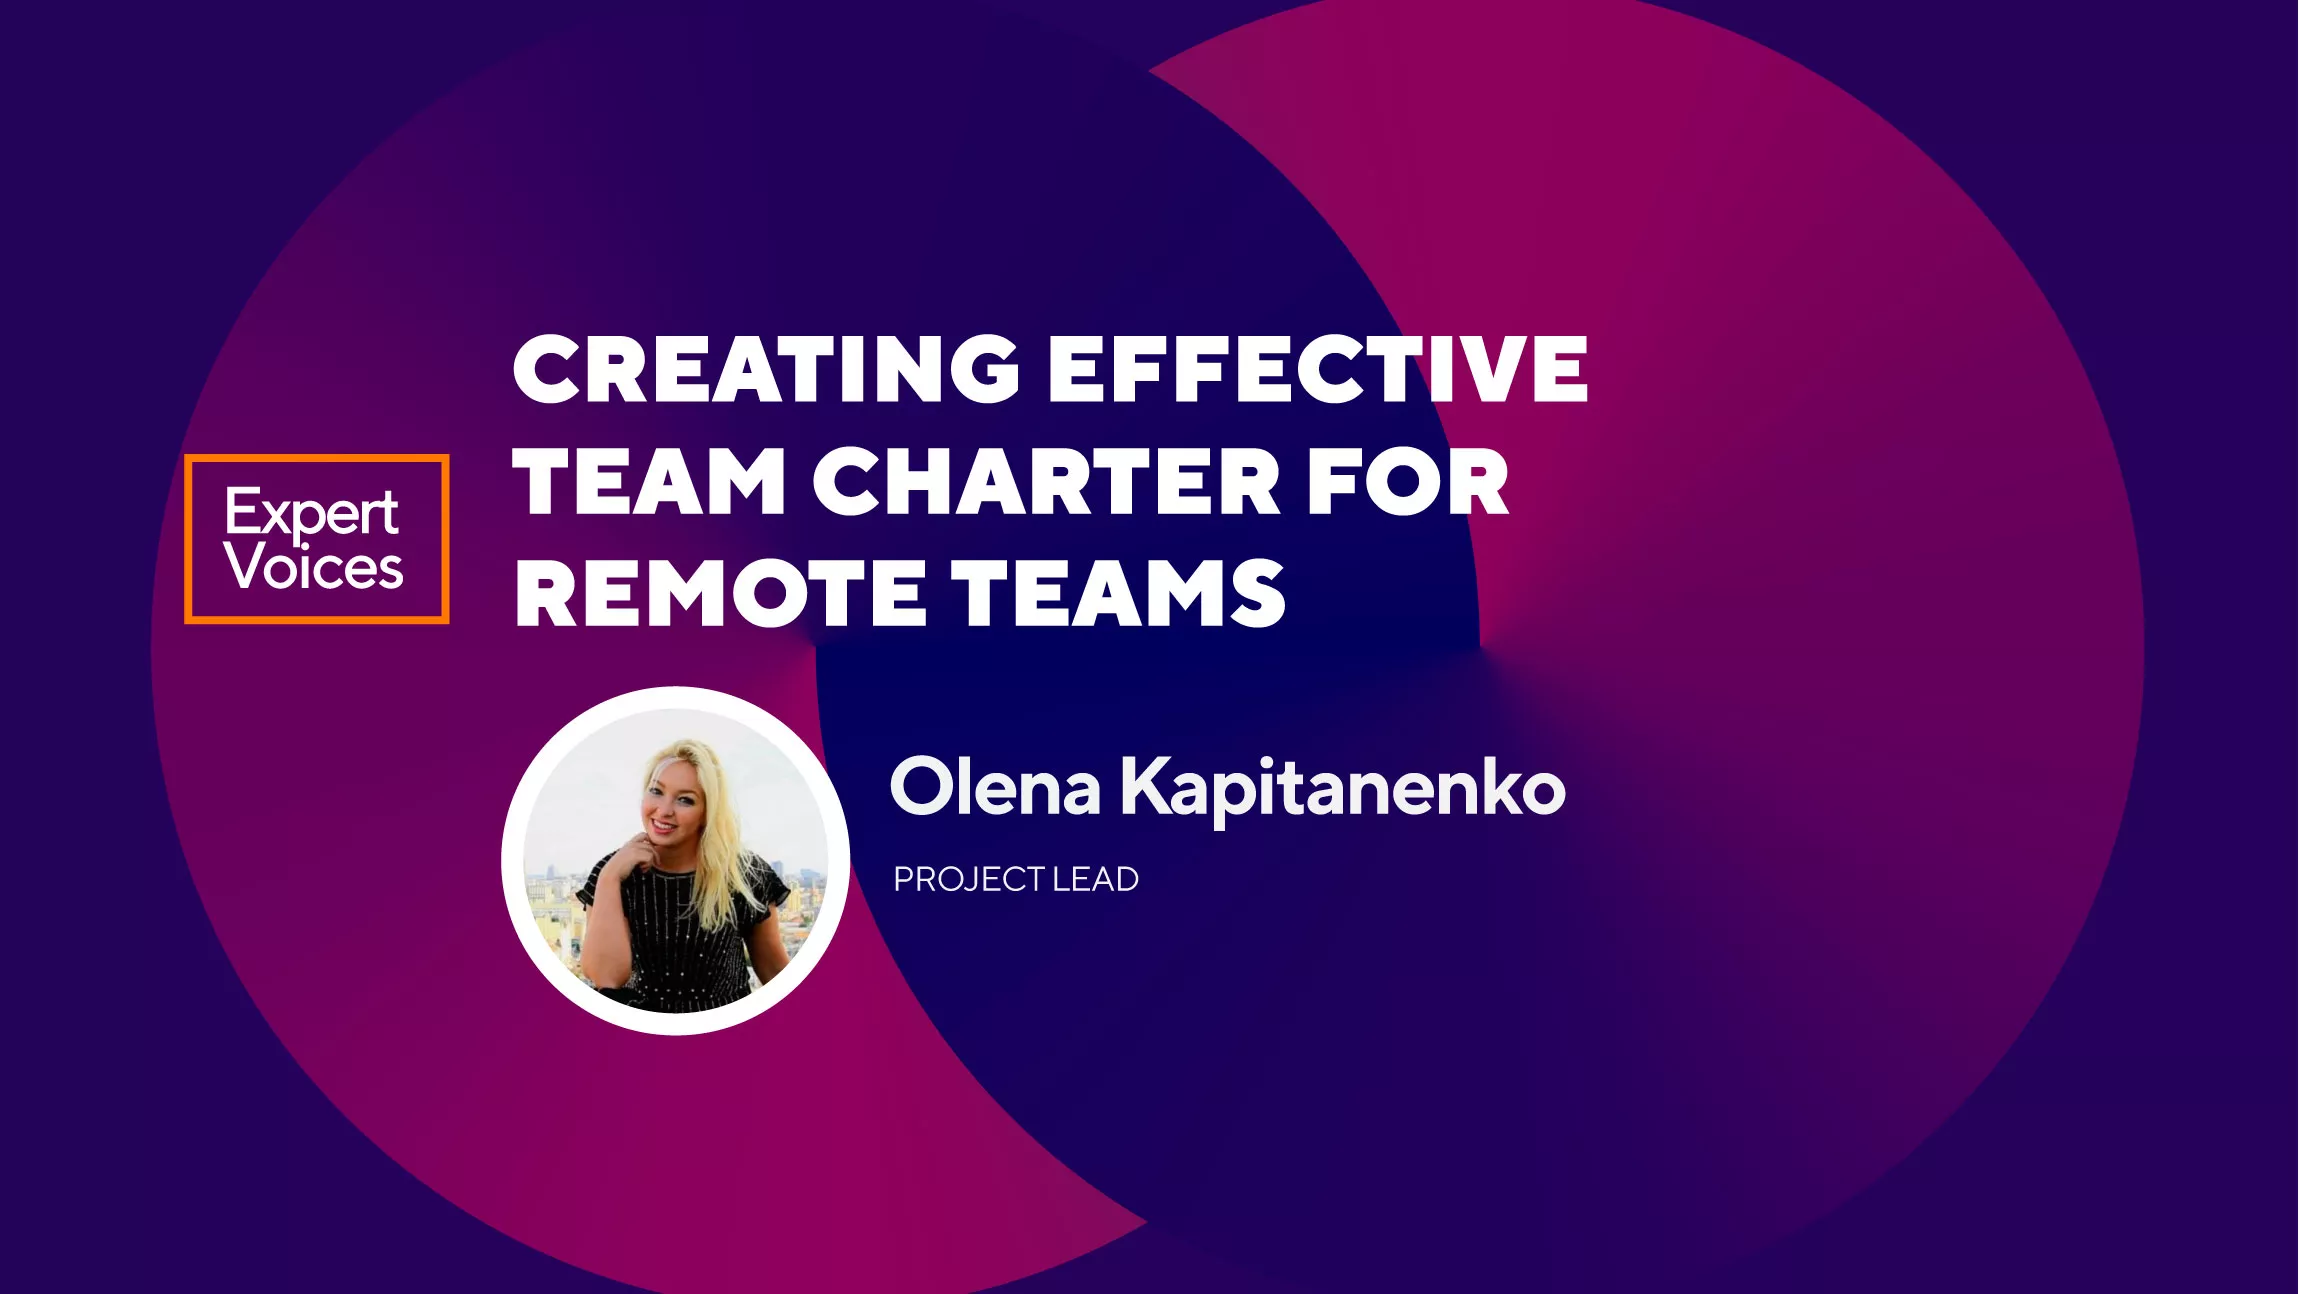 Creating an Effective Team Charter for Remote Teams